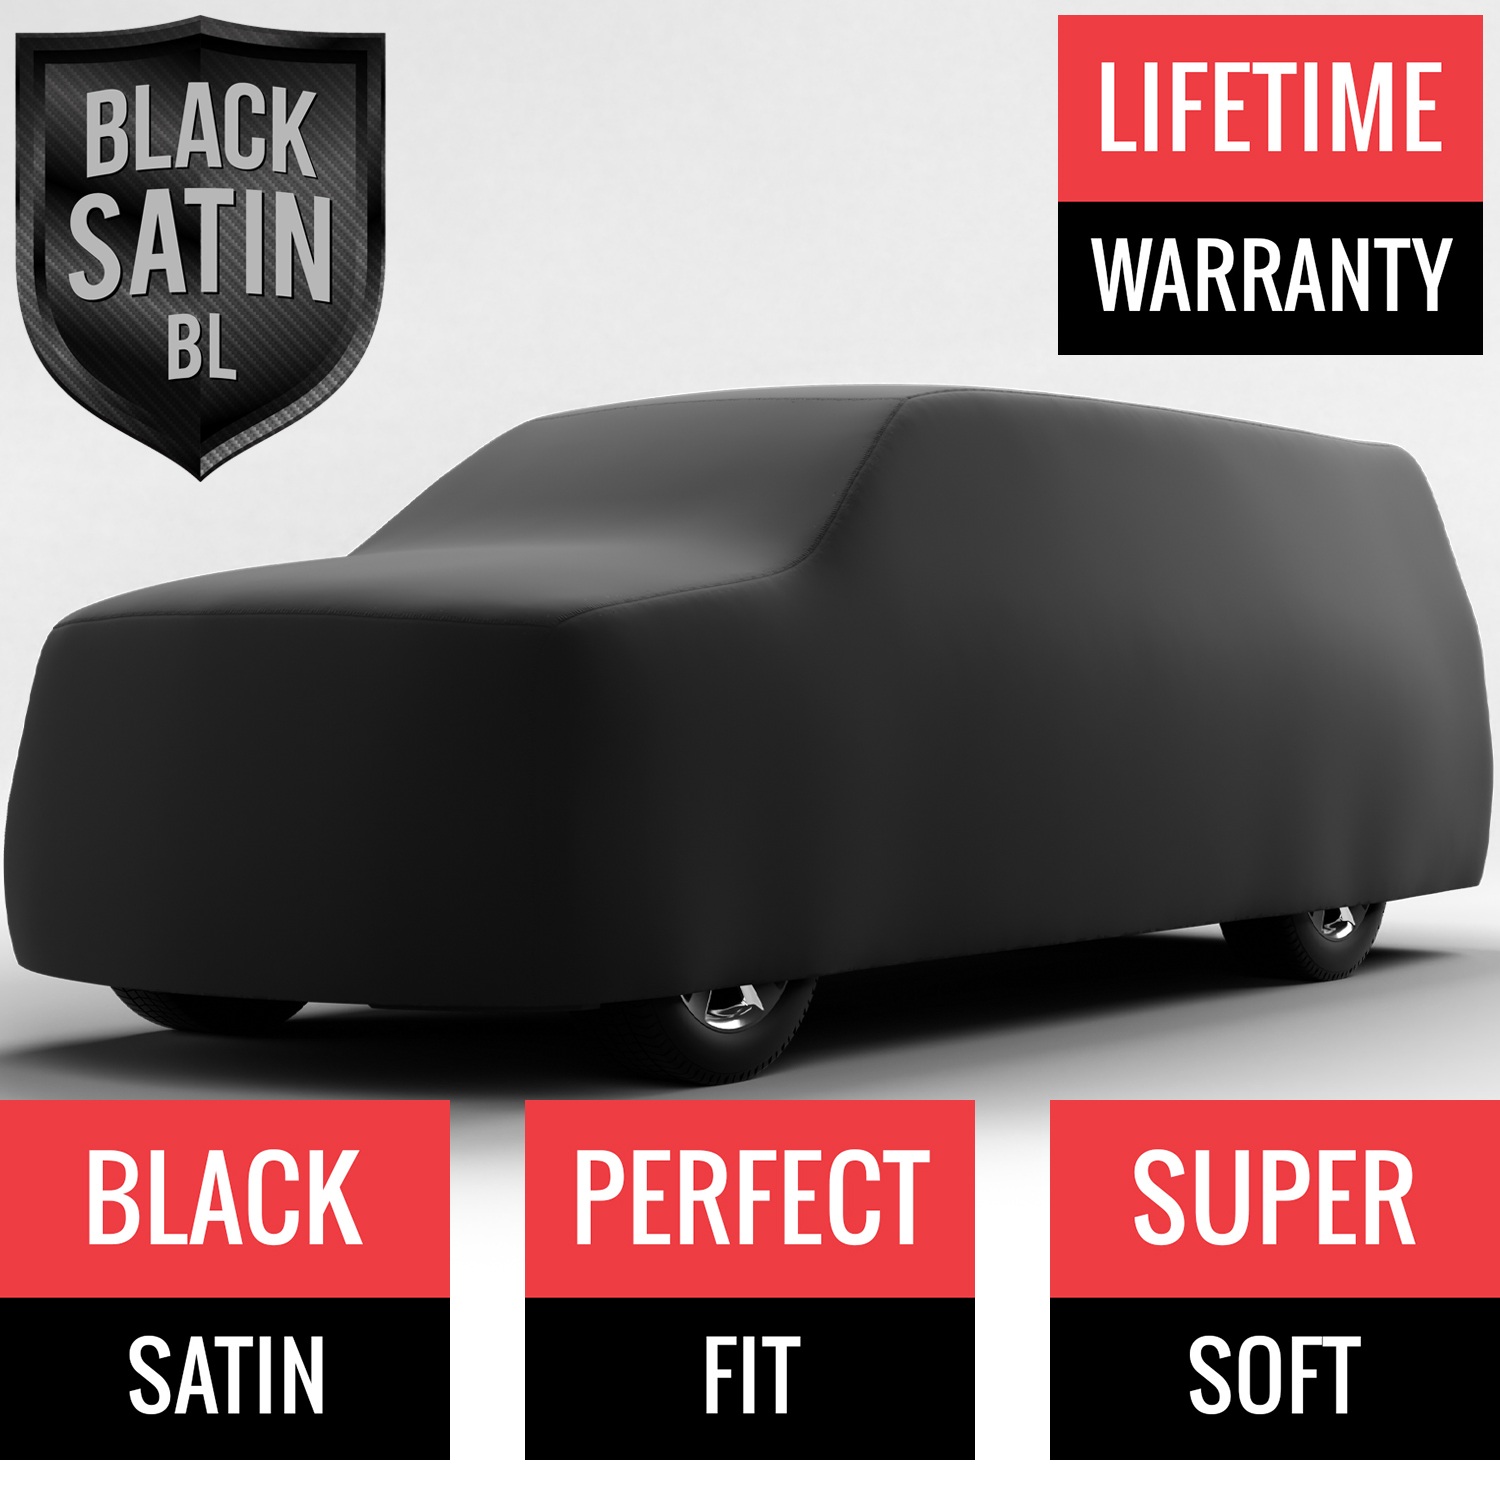 Black Satin BL - Black Car Cover for Ford F-150 2015 Regular Cab Pickup 6.5 Feet Bed with Camper Shell